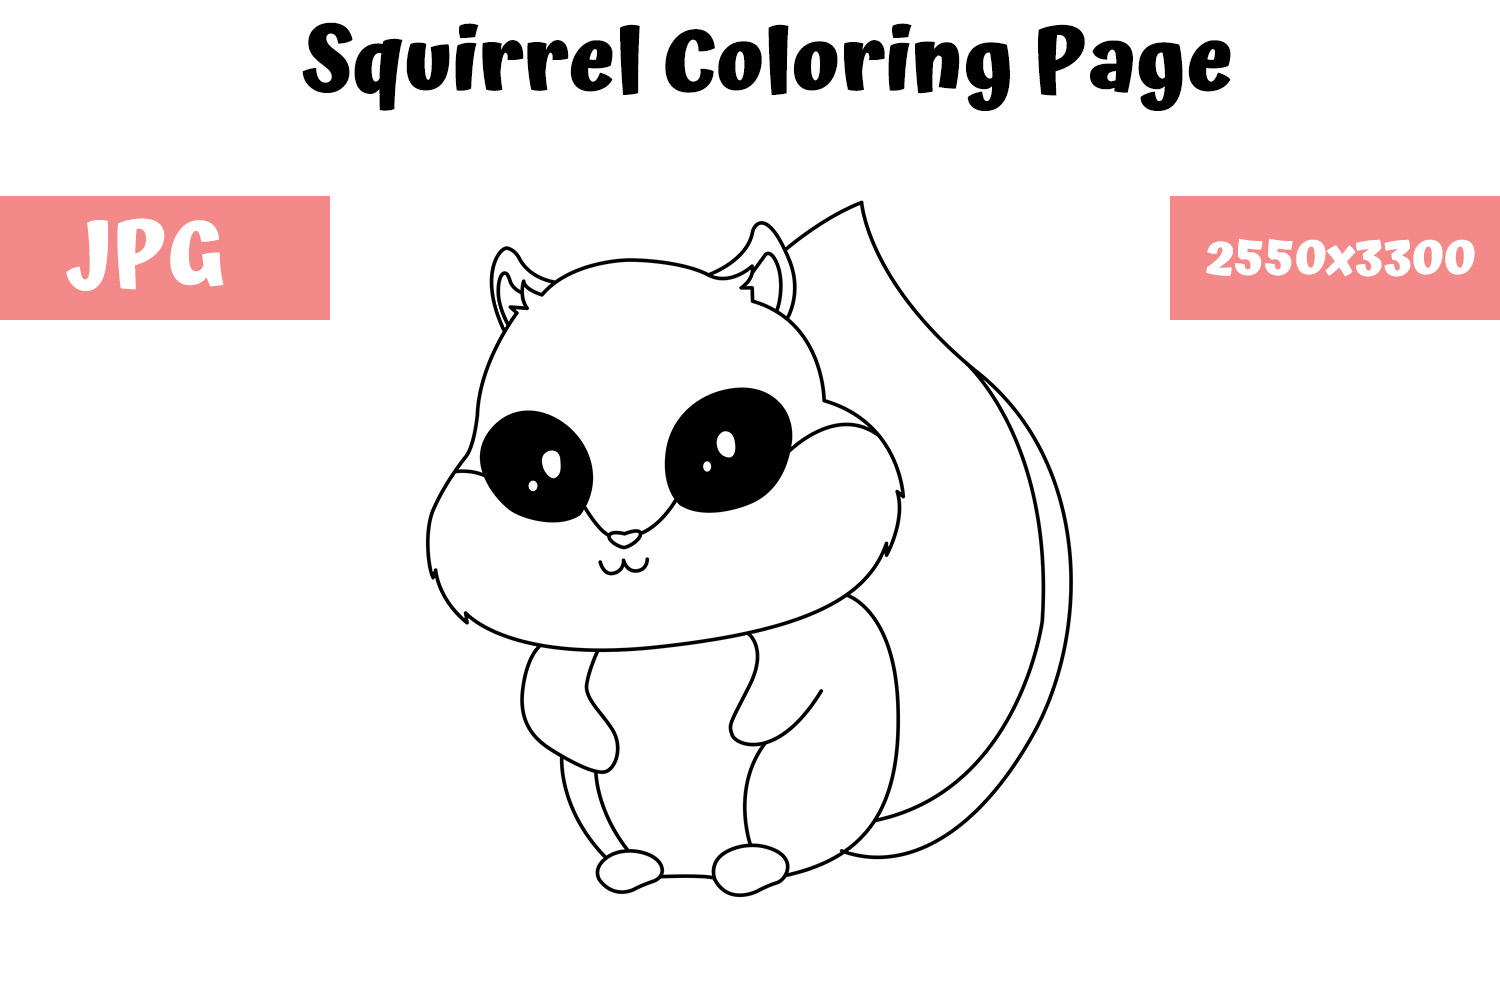 Squirrel Coloring Book Page For Kids Graphic By Mybeautifulfiles Creative Fabrica